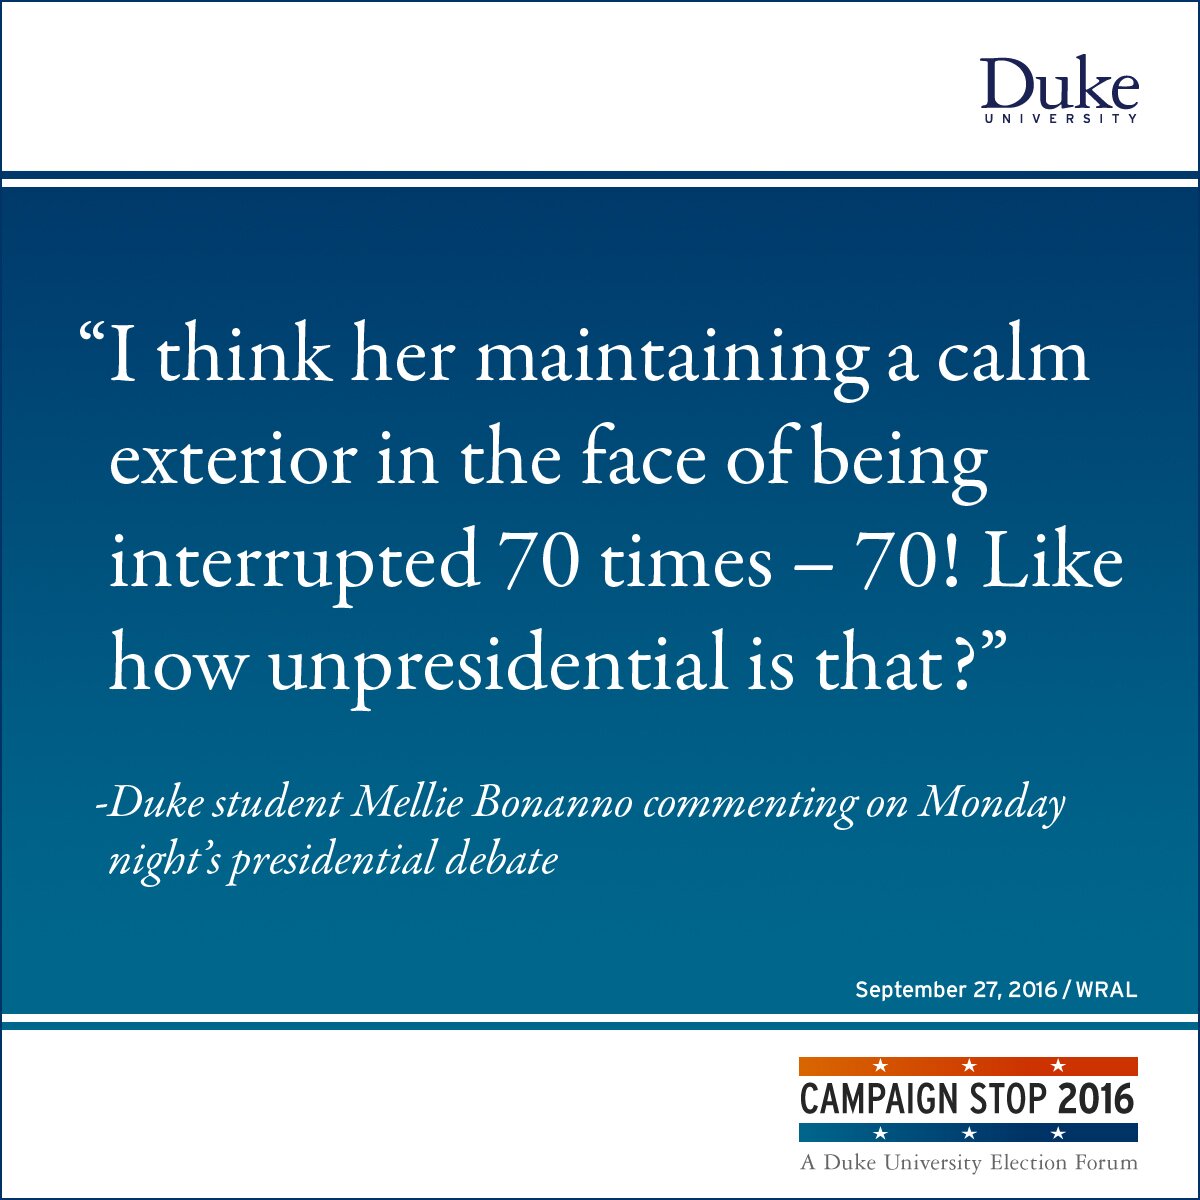 “I think her maintaining a calm exterior in the face of being interrupted 70 times – 70! Like how unpresidential is that?” -Duke student Mellie Bonanno commenting on Monday night’s presidential debate